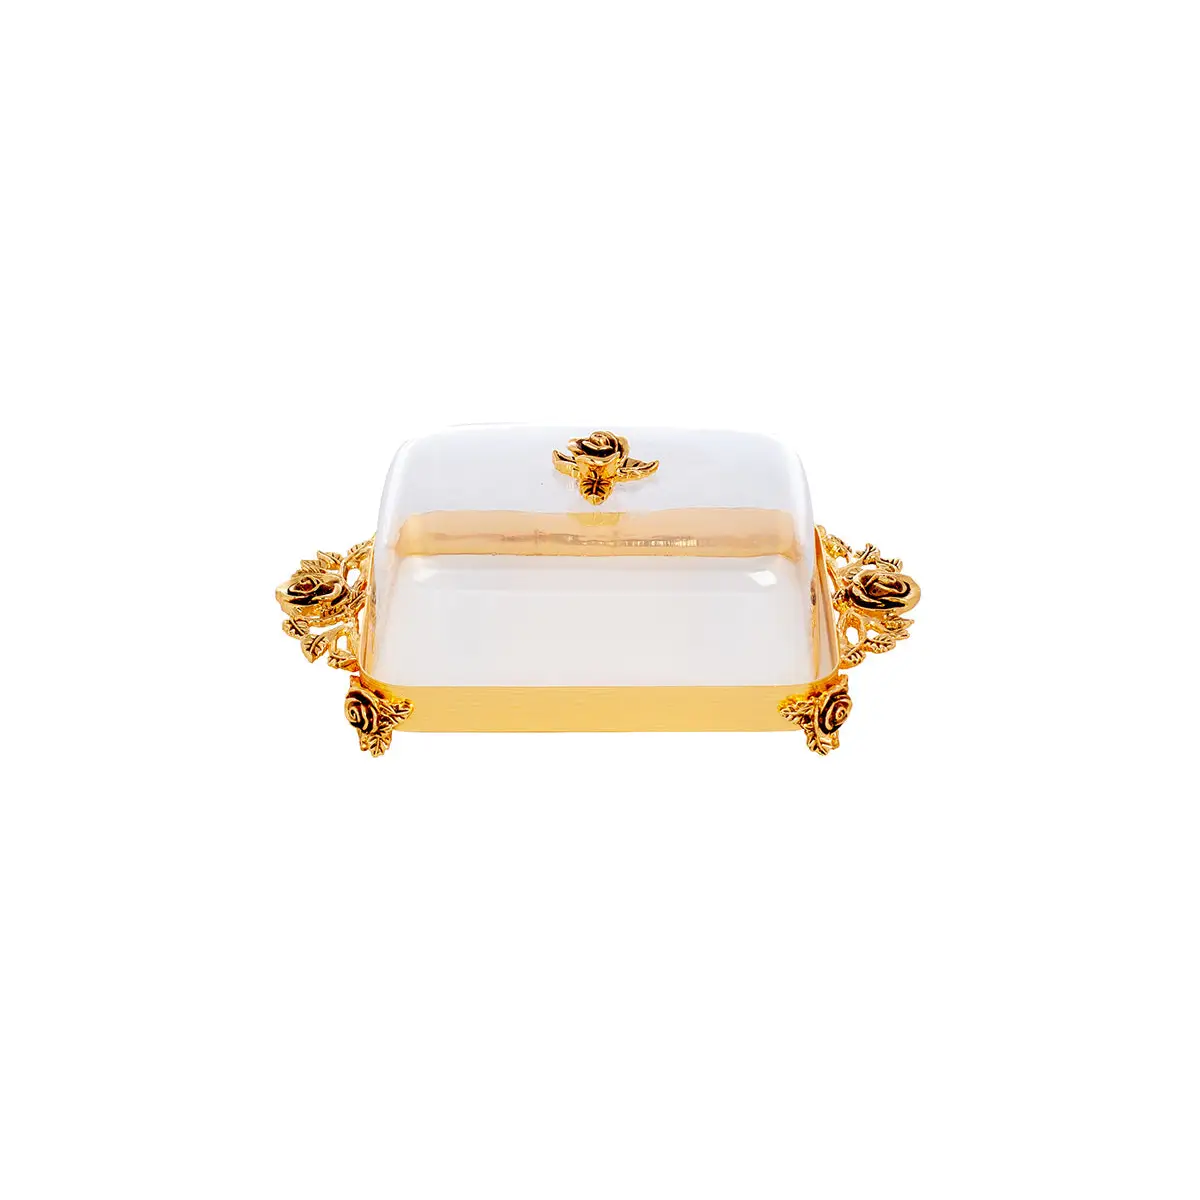 GOLD PLATED BUTTER DISH - ROSE COLLECTION